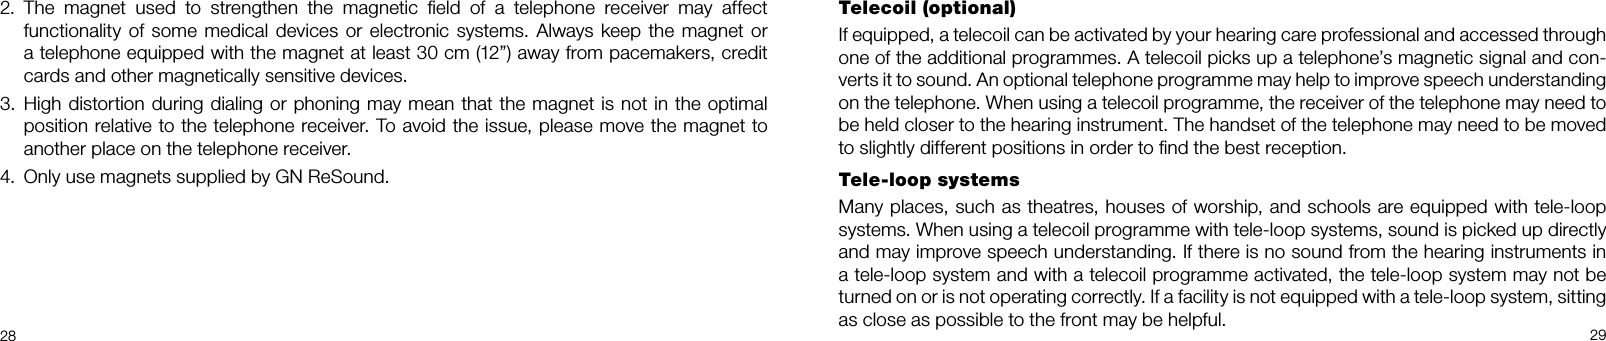 2829Telecoil (optional)If equipped, a telecoil can be activated by your hearing care professional and accessed through one of the additional programmes. A telecoil picks up a telephone’s magnetic signal and con-verts it to sound. An optional telephone programme may help to improve speech understanding on the telephone. When using a telecoil programme, the receiver of the telephone may need to be held closer to the hearing instrument. The handset of the telephone may need to be moved to slightly different positions in order to ﬁnd the best reception.Tele-loop systemsMany places, such as theatres, houses of worship, and schools are equipped with tele-loop systems. When using a telecoil programme with tele-loop systems, sound is picked up directly and may improve speech understanding. If there is no sound from the hearing instruments in a tele-loop system and with a telecoil programme activated, the tele-loop system may not be turned on or is not operating correctly. If a facility is not equipped with a tele-loop system, sitting as close as possible to the front may be helpful.The  magnet  used  to  strengthen  the  magnetic  ﬁeld  of  a  telephone  receiver  may  affect 2. functionality of some medical devices  or electronic systems. Always keep the magnet or a telephone equipped with the magnet at least 30 cm (12”) away from pacemakers, credit cards and other magnetically sensitive devices.High distortion during dialing or phoning may mean that the magnet is not in the optimal 3. position relative to the telephone receiver. To avoid the issue, please move the magnet to another place on the telephone receiver.Only use magnets supplied by GN ReSound.4. 